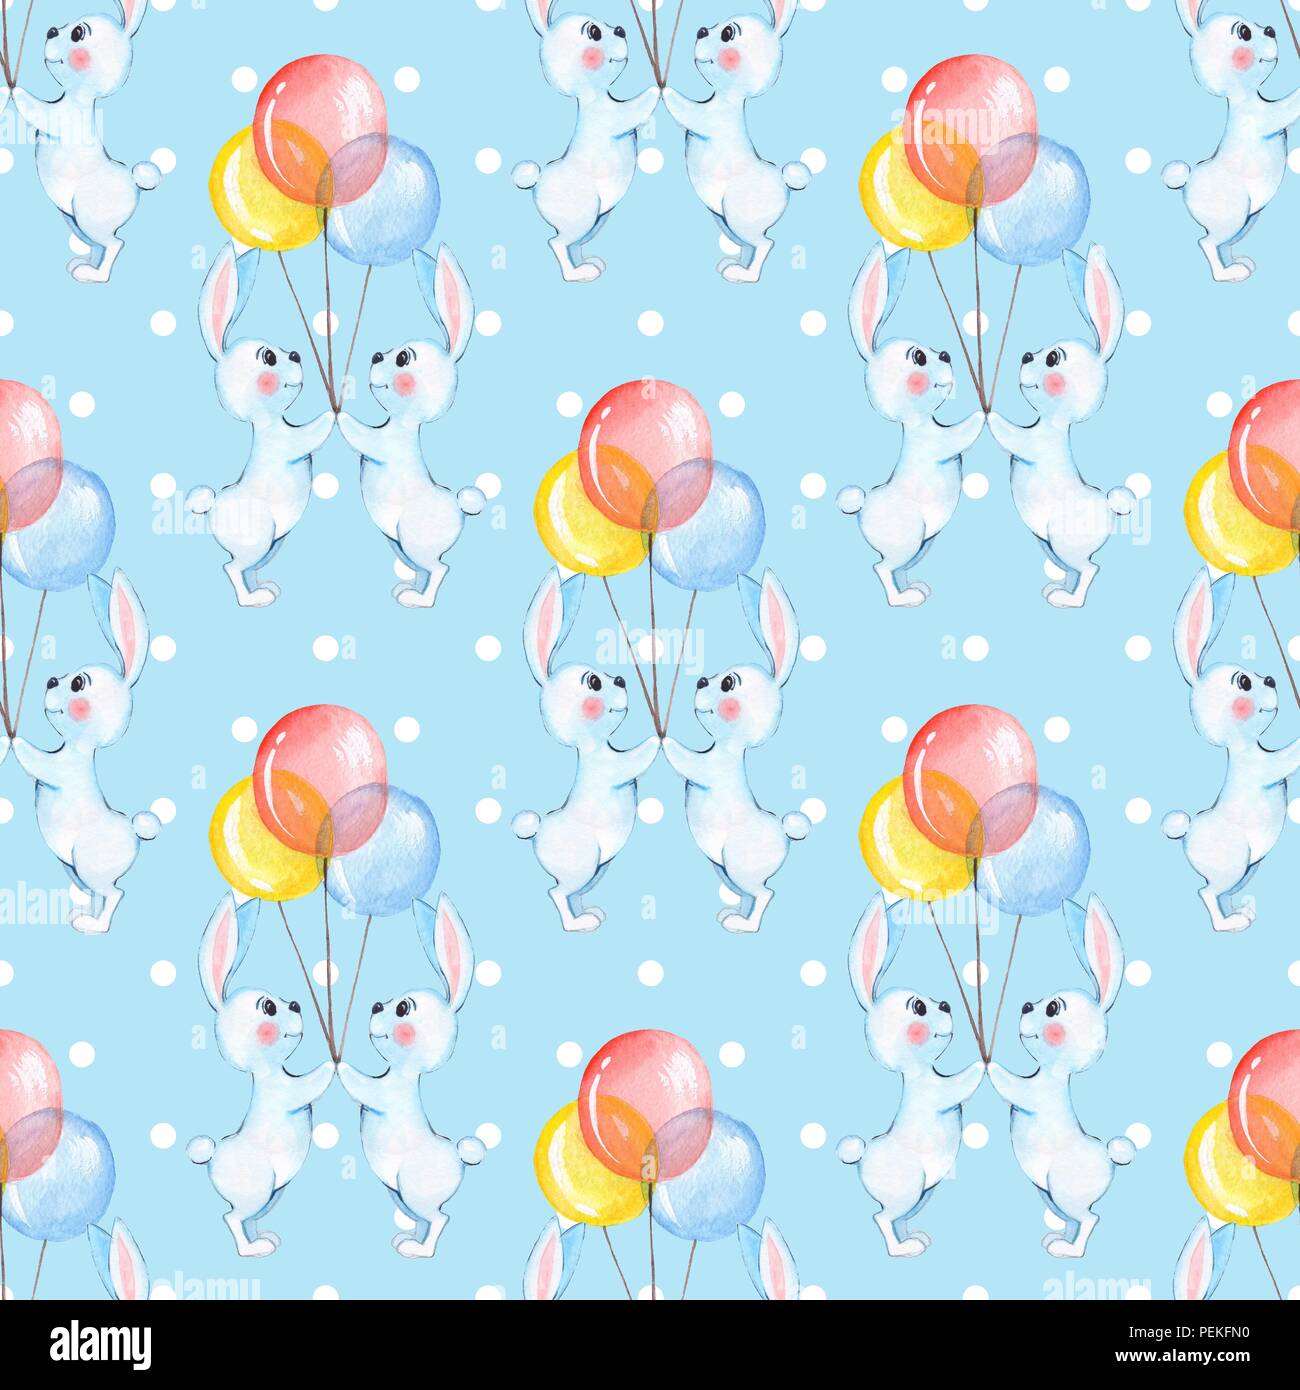 Seamless pattern with cartoon white rabbits and balloons. Watercolor background 7 Stock Photo